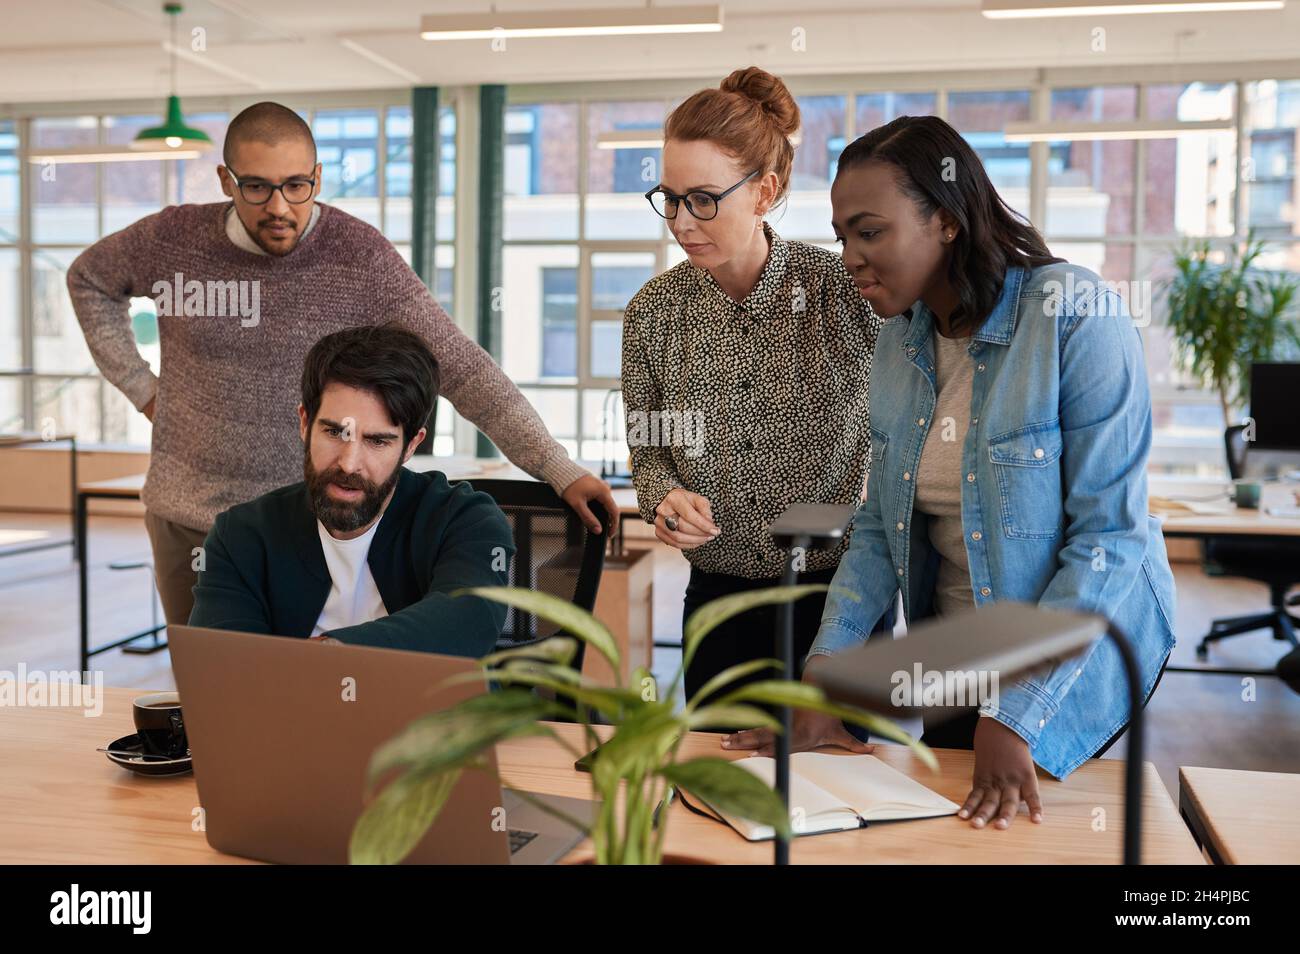 Focused group of diverse businesspeople working on a laptop together Stock Photo